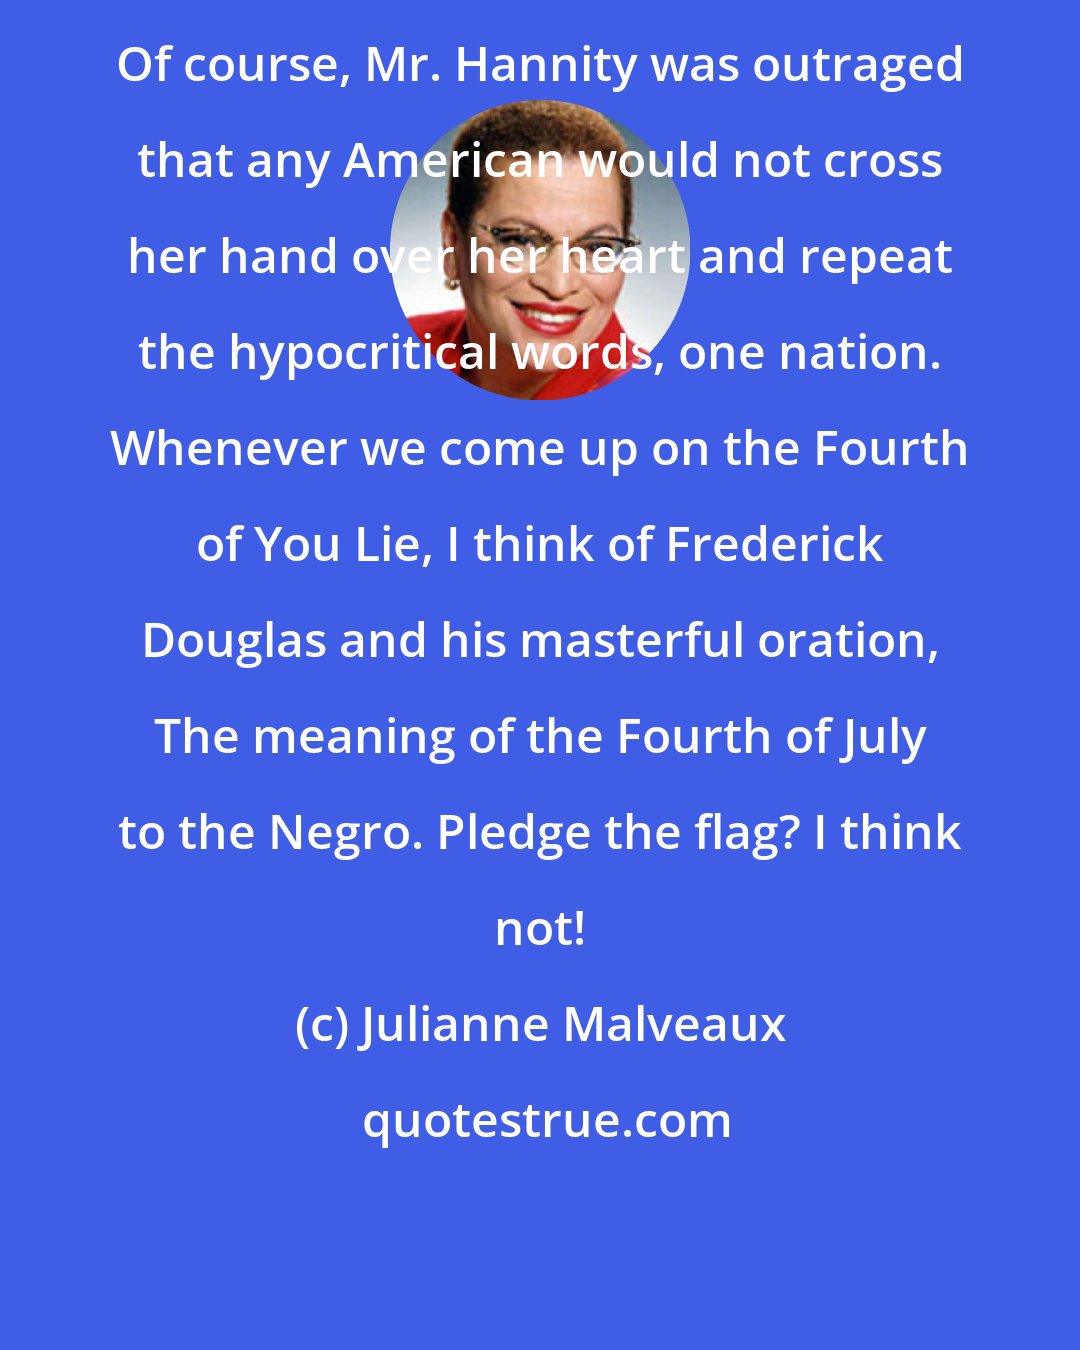 Julianne Malveaux: Of course, Mr. Hannity was outraged that any American would not cross her hand over her heart and repeat the hypocritical words, one nation. Whenever we come up on the Fourth of You Lie, I think of Frederick Douglas and his masterful oration, The meaning of the Fourth of July to the Negro. Pledge the flag? I think not!